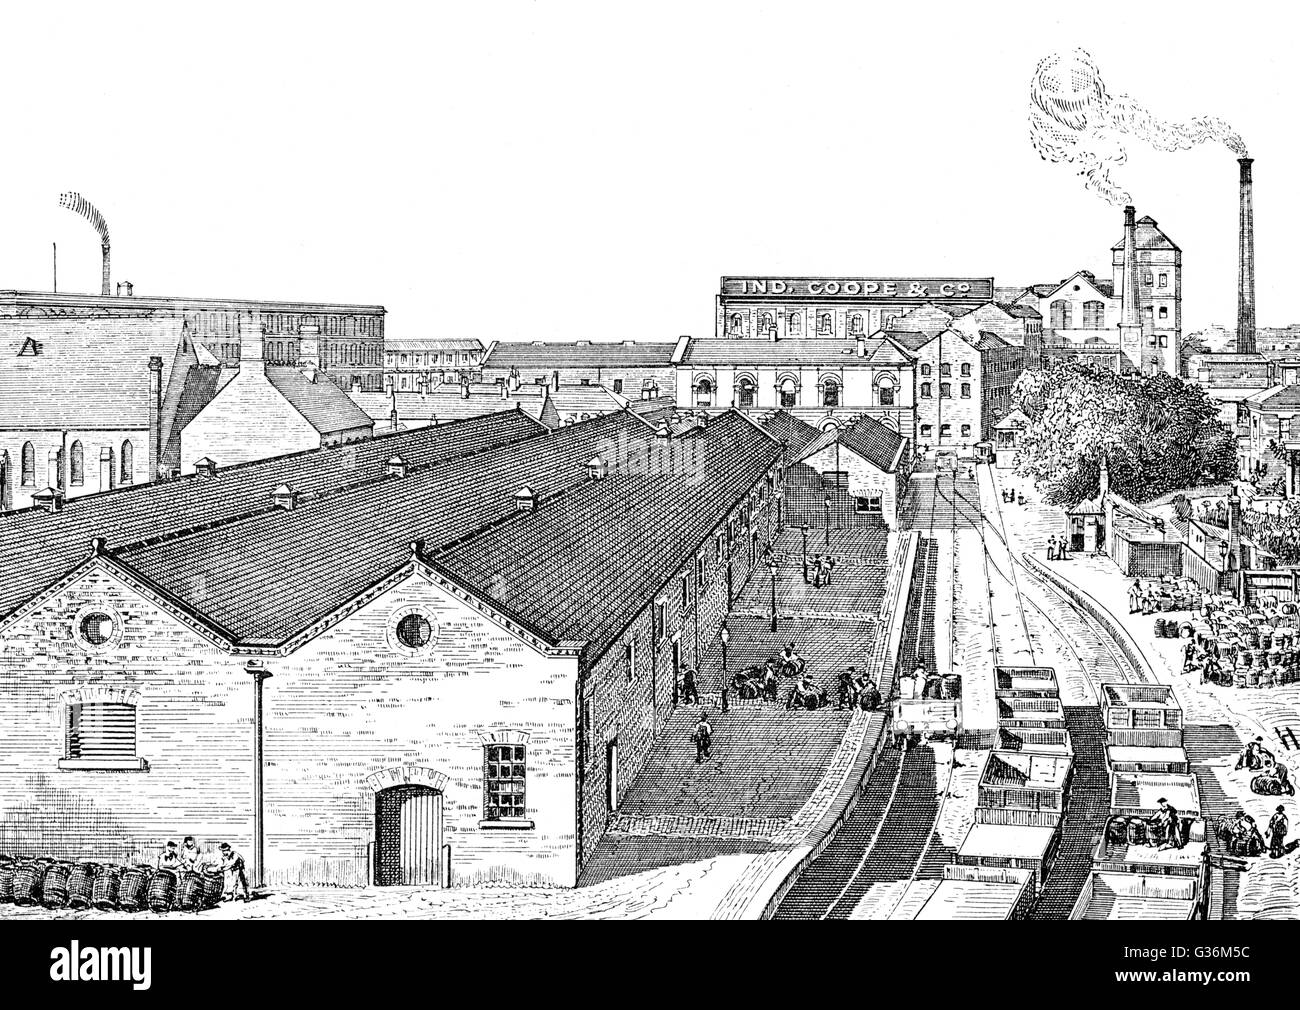 Ind Coope Brewery, Burton     Date: 1889 Stock Photo